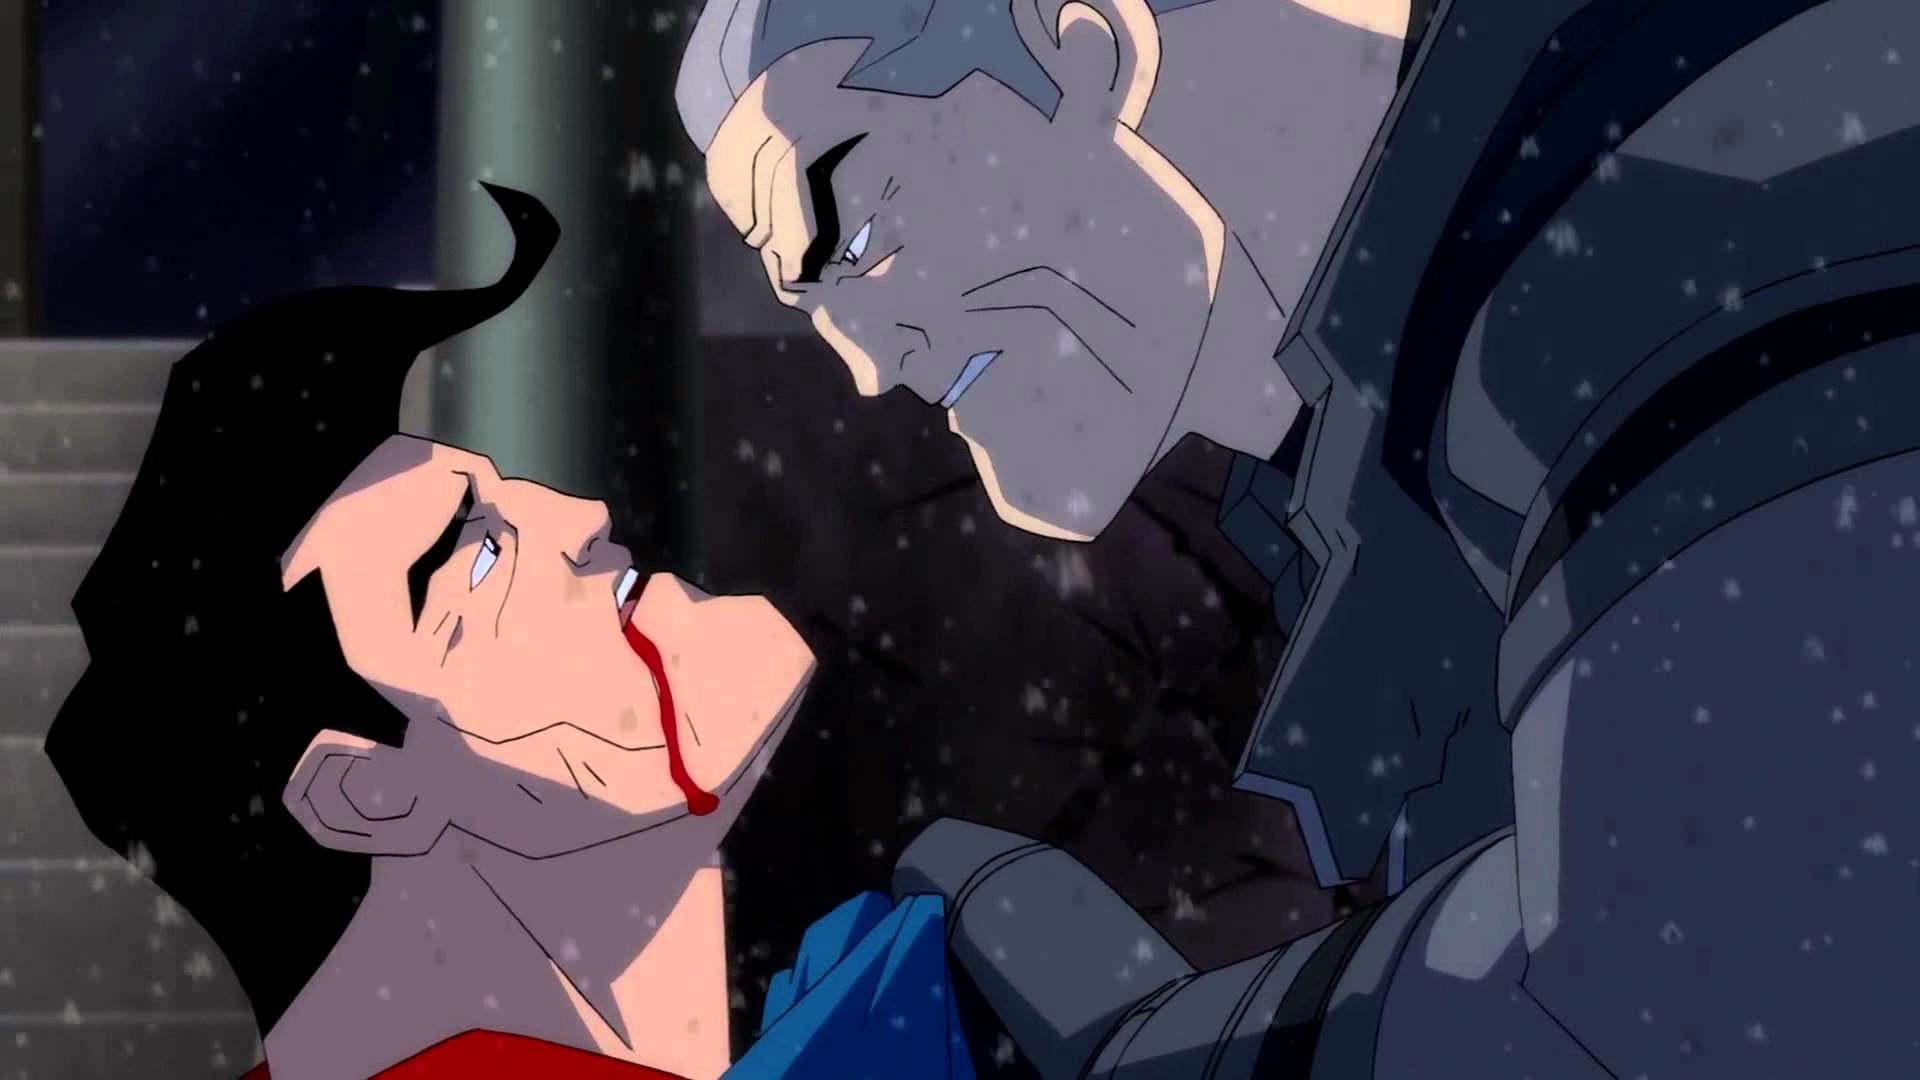 1920x1080 "I Want you to remember the one Man who beat you" - Batman to Superman -  YouTube